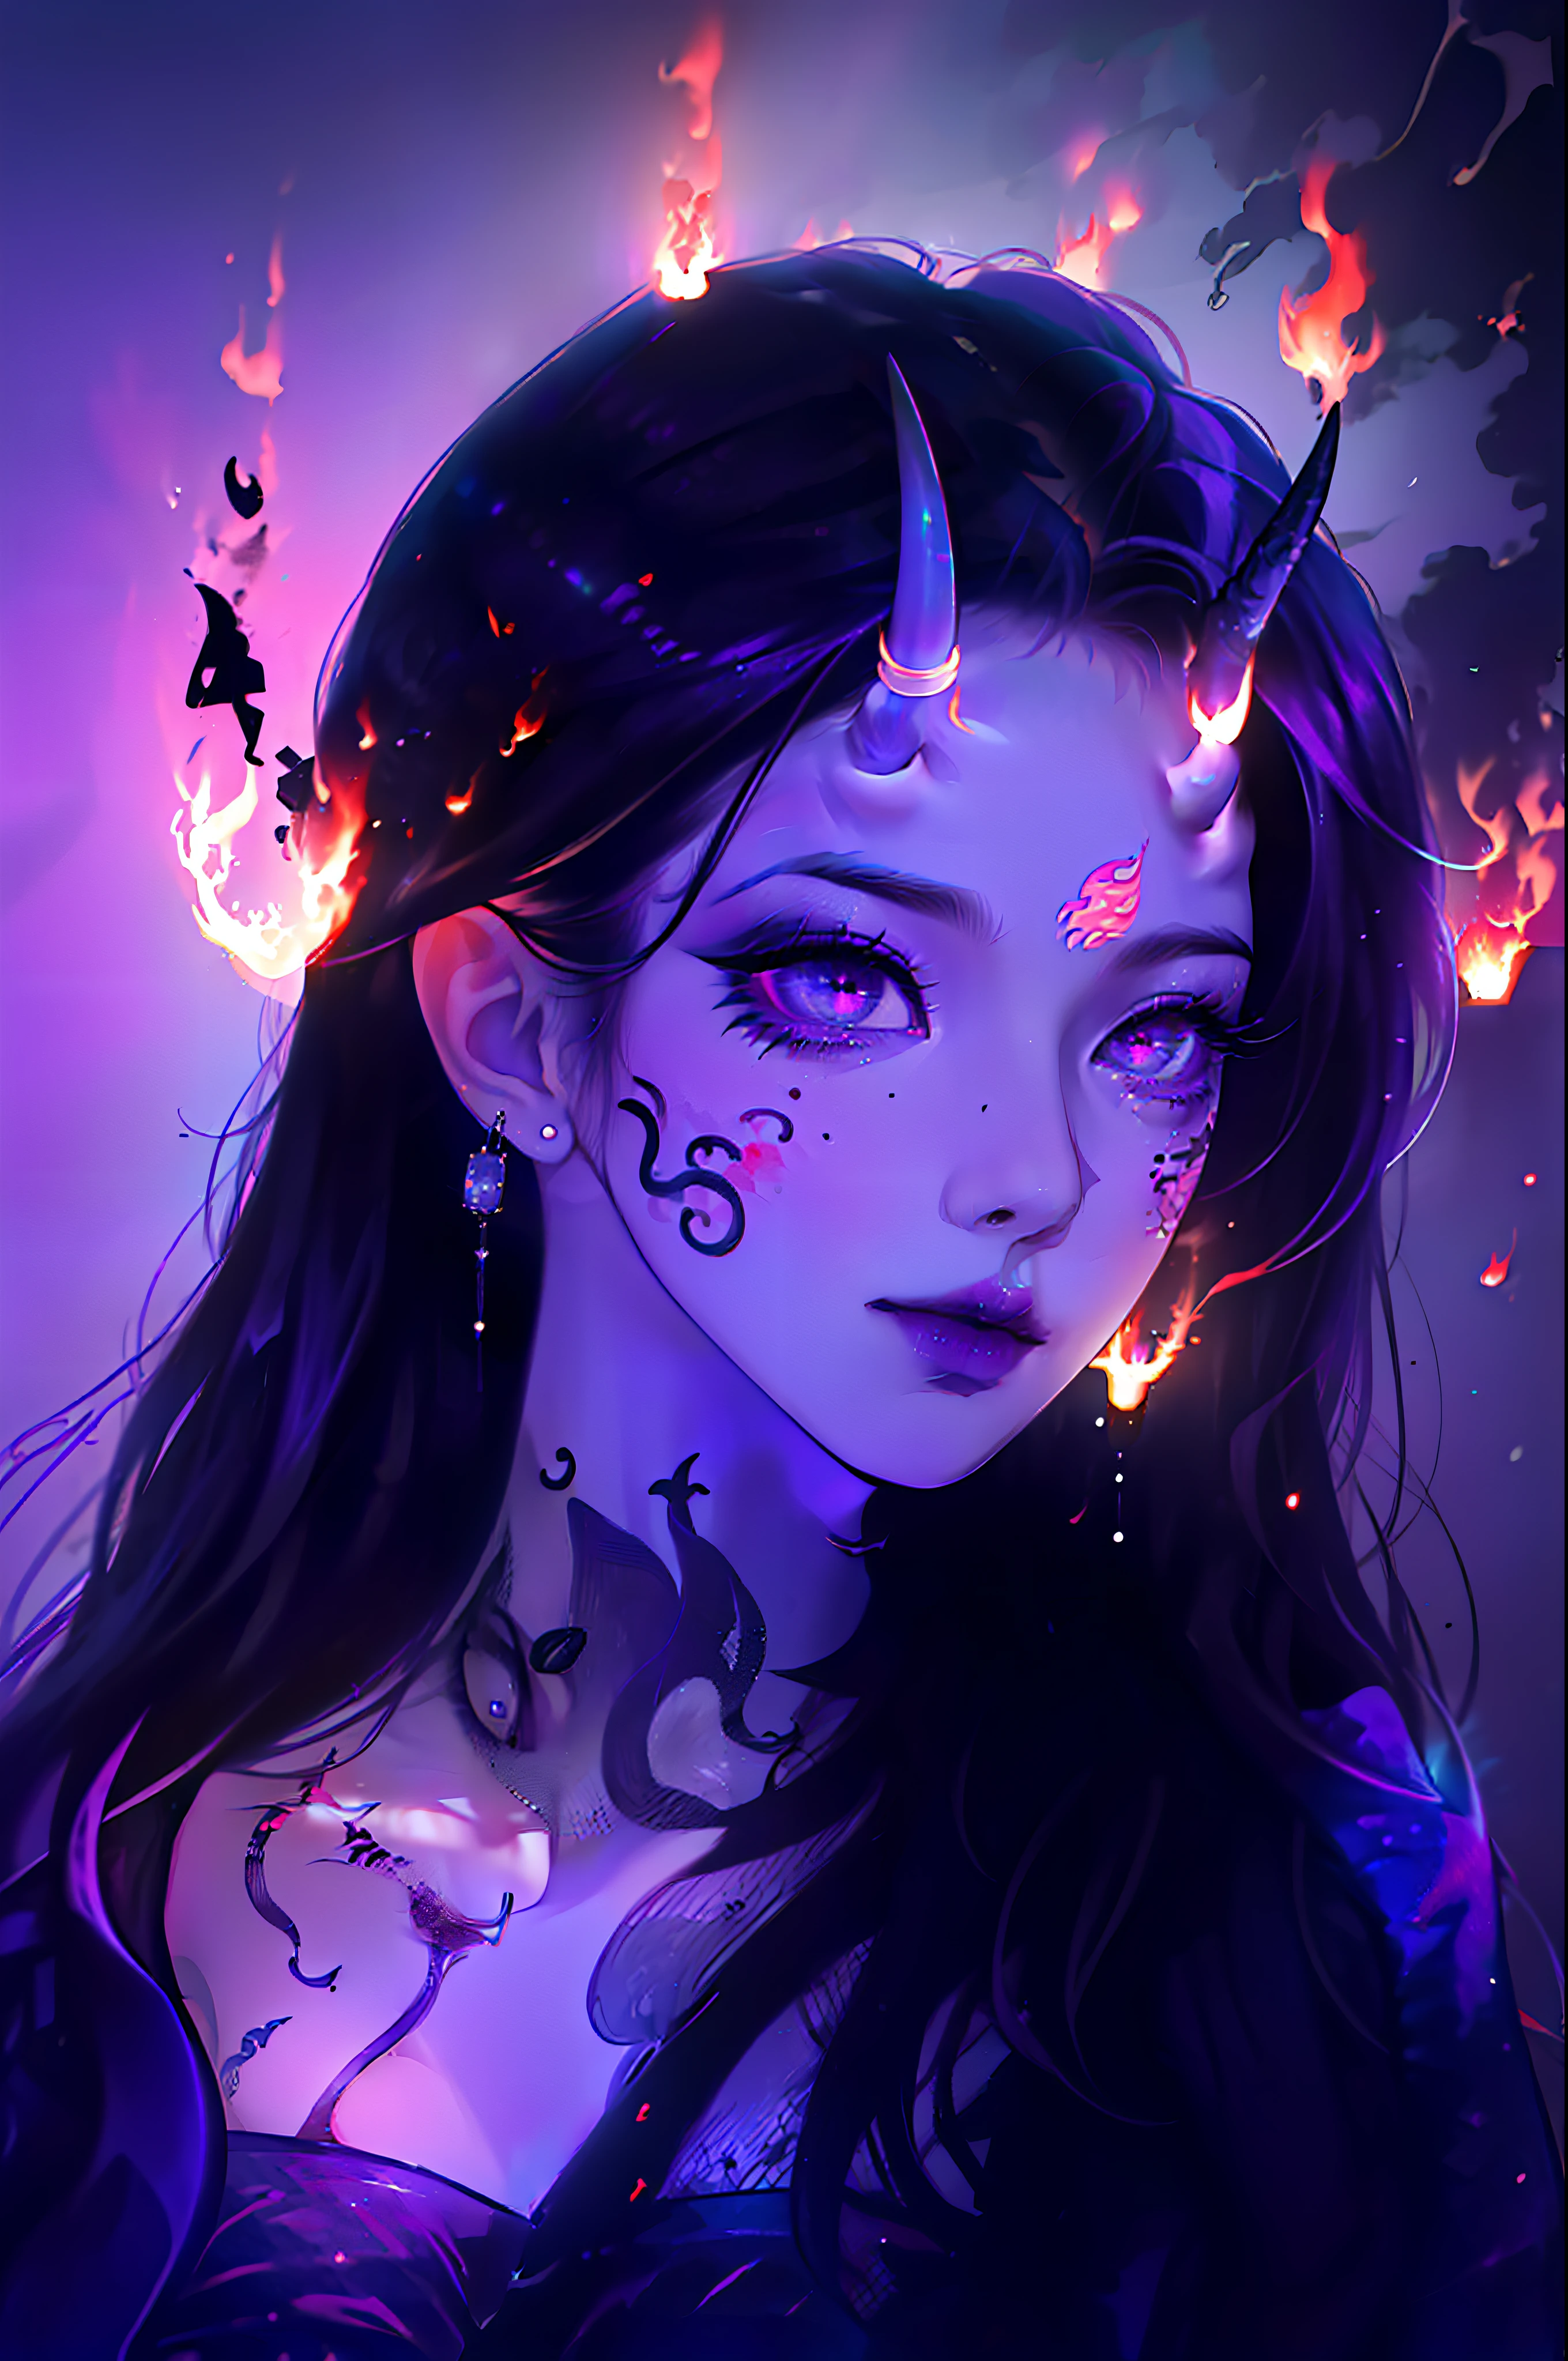 Masterpiece, best quality, high quality, (full body shot:1.3), solo anime portrait, female, 1girl, (bold daring black goth outfit with a black skirt and fishnets:1.4), (black glowing purple highlights:1.5), (purple smoke and flames around her:1.6), (oni horns:1.6), she is stunning and super beautiful, goddess like appearance, `(gradient_glowing_purple_siren_eyes:1.5), (beautiful flower tattoo:1.4), rings, demonic, divine, hellish, darkness, effeminate, JRPG art, trending on caravaggio, intrinsicated and detailed smug smirk, looking at camera, face focus, highly-detailed, top lightning, trending on pixiv, HD digital, 32k,